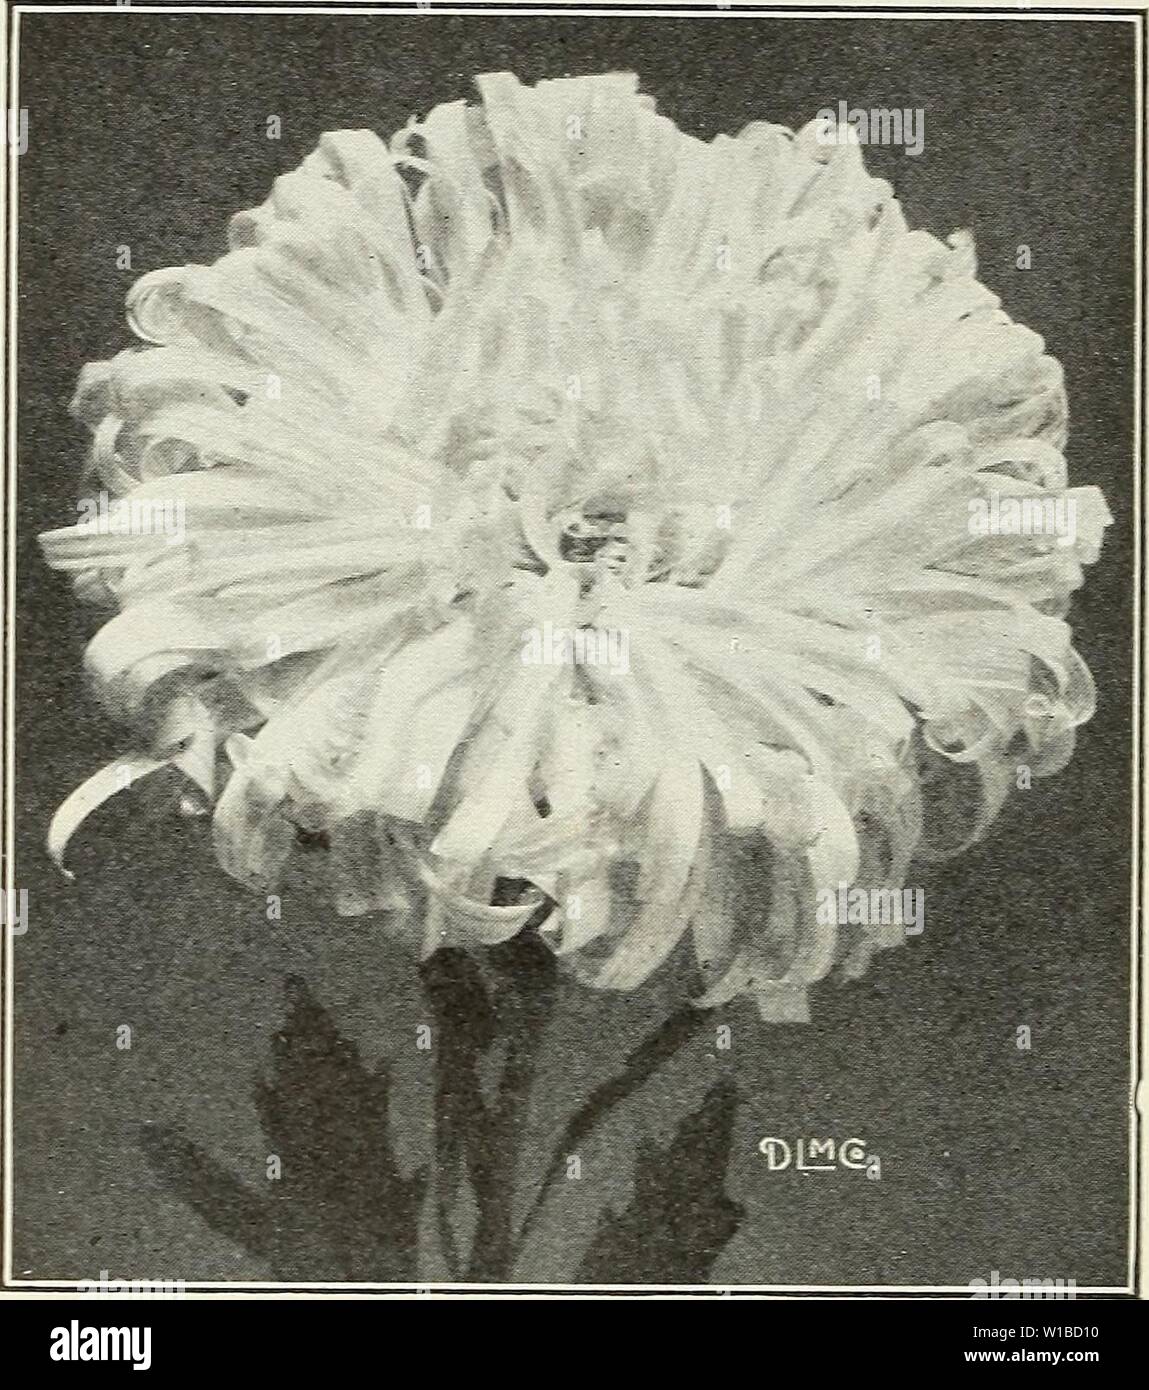 Archive image from page 37 of Descriptive catalogue of vegetable and. Descriptive catalogue of vegetable and flower seeds . descriptivecatal1926john Year: 1926  Aster, Crego Giant CREGO GIANT, COMET or OSTRICH PLUME MIDSEASON A flower of the Giant Comet type, often measuring from -i to 5 inches in diameter and resembling large chr&gt;-santhemums. They are of strong growth, attain- ing the height of 3 feet. Pkts. 10c. ?4 OZ. Lavender SI.00 Rose .. Light Blue 1.00  Pink.. Crimson 1.00 White Purple 1.00 Mixed K oz. .SI.00 . 1.00 . 1.00 . 1.00 Aster, Queen of the Market Collection of 7 colors as Stock Photo